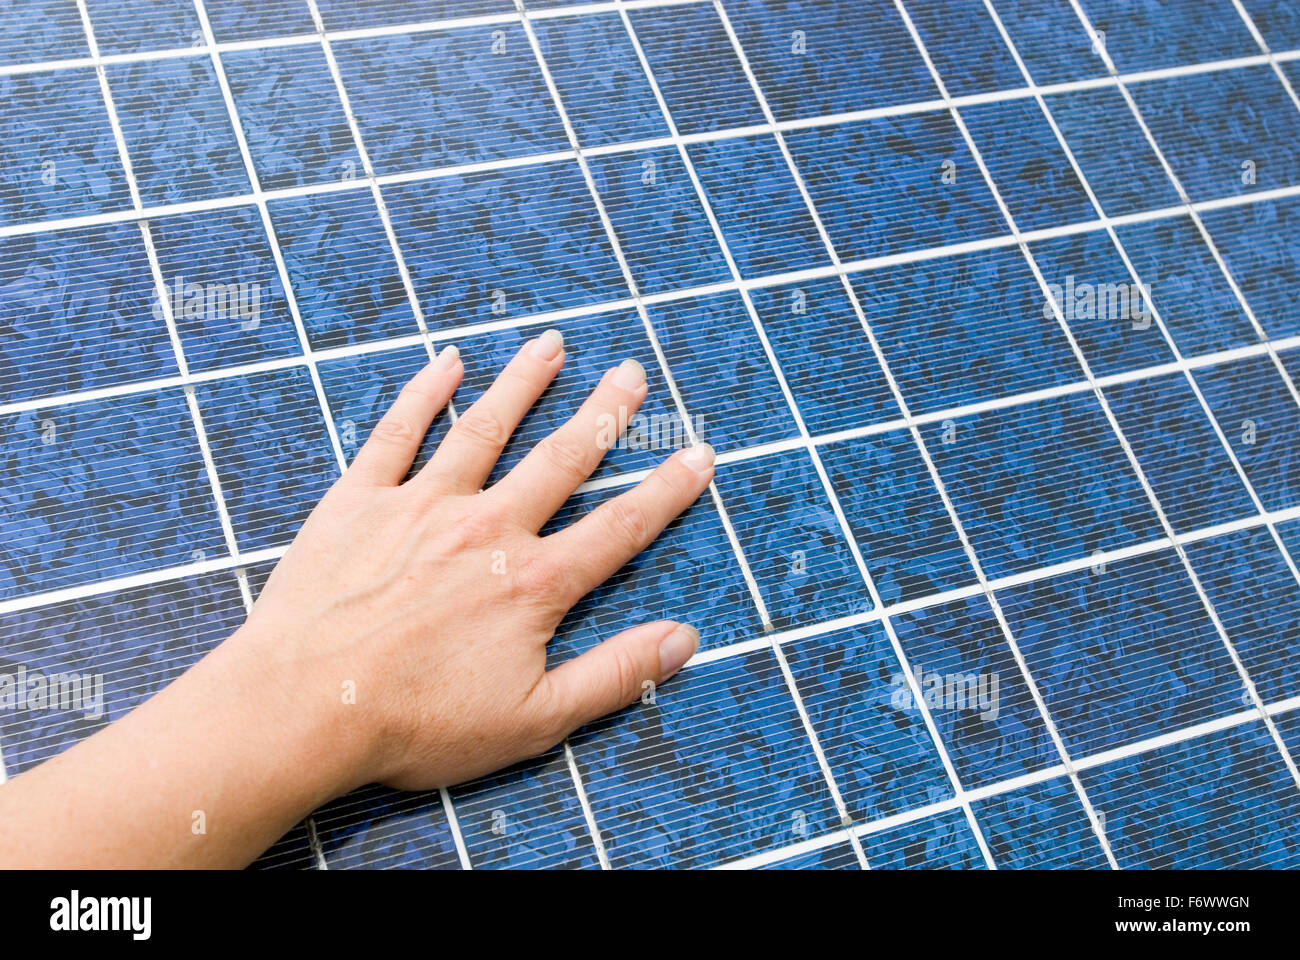 Hand on a solar cell Stock Photo